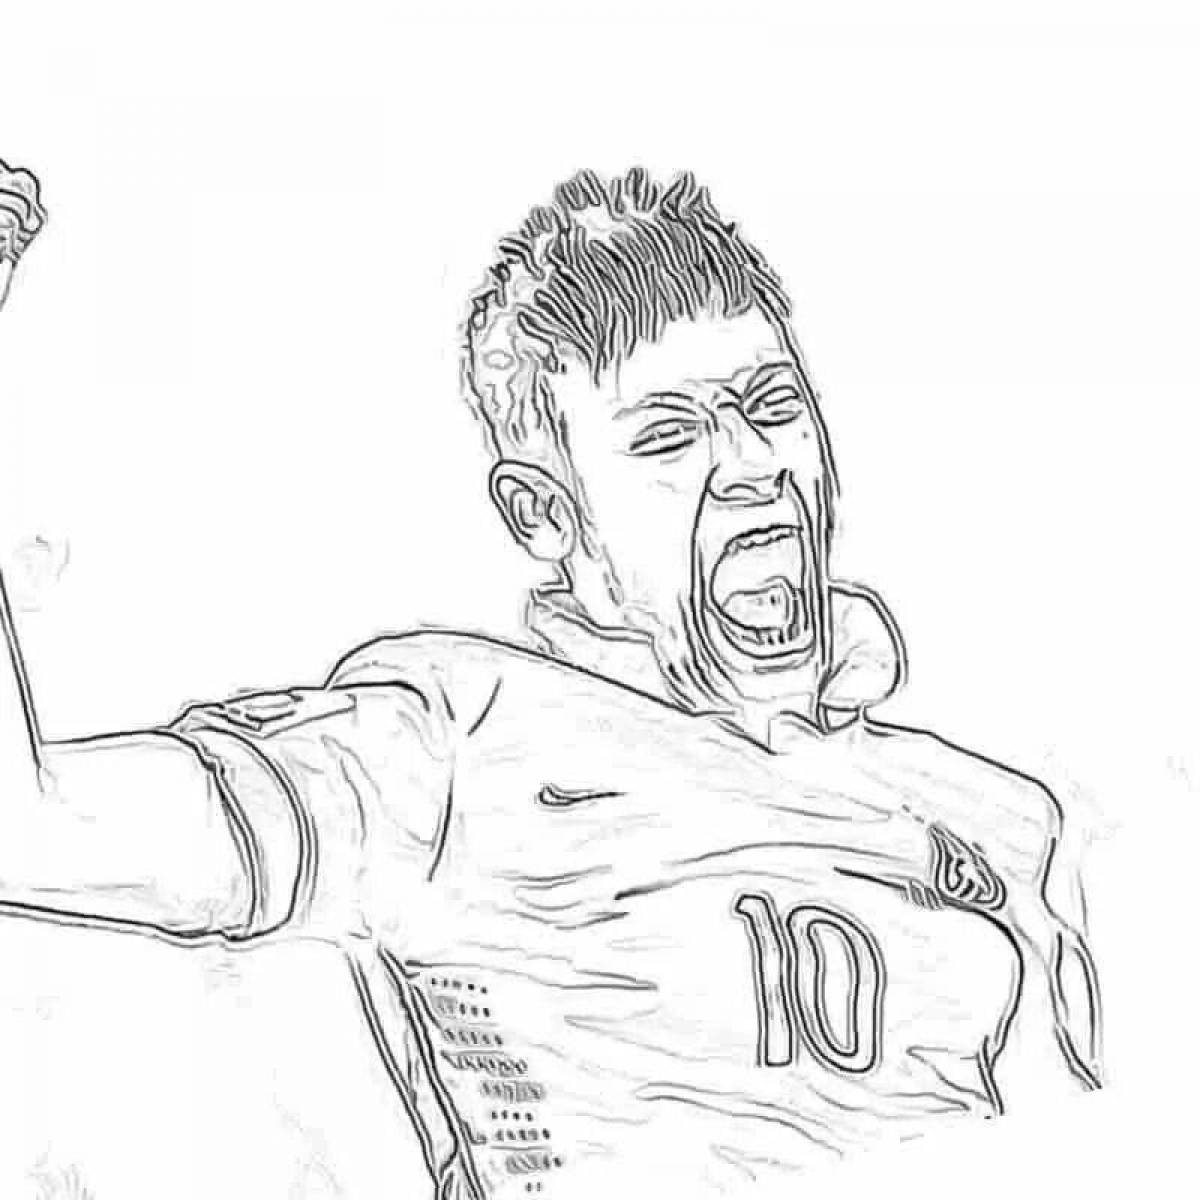 Coloring page glorious soccer player neymar